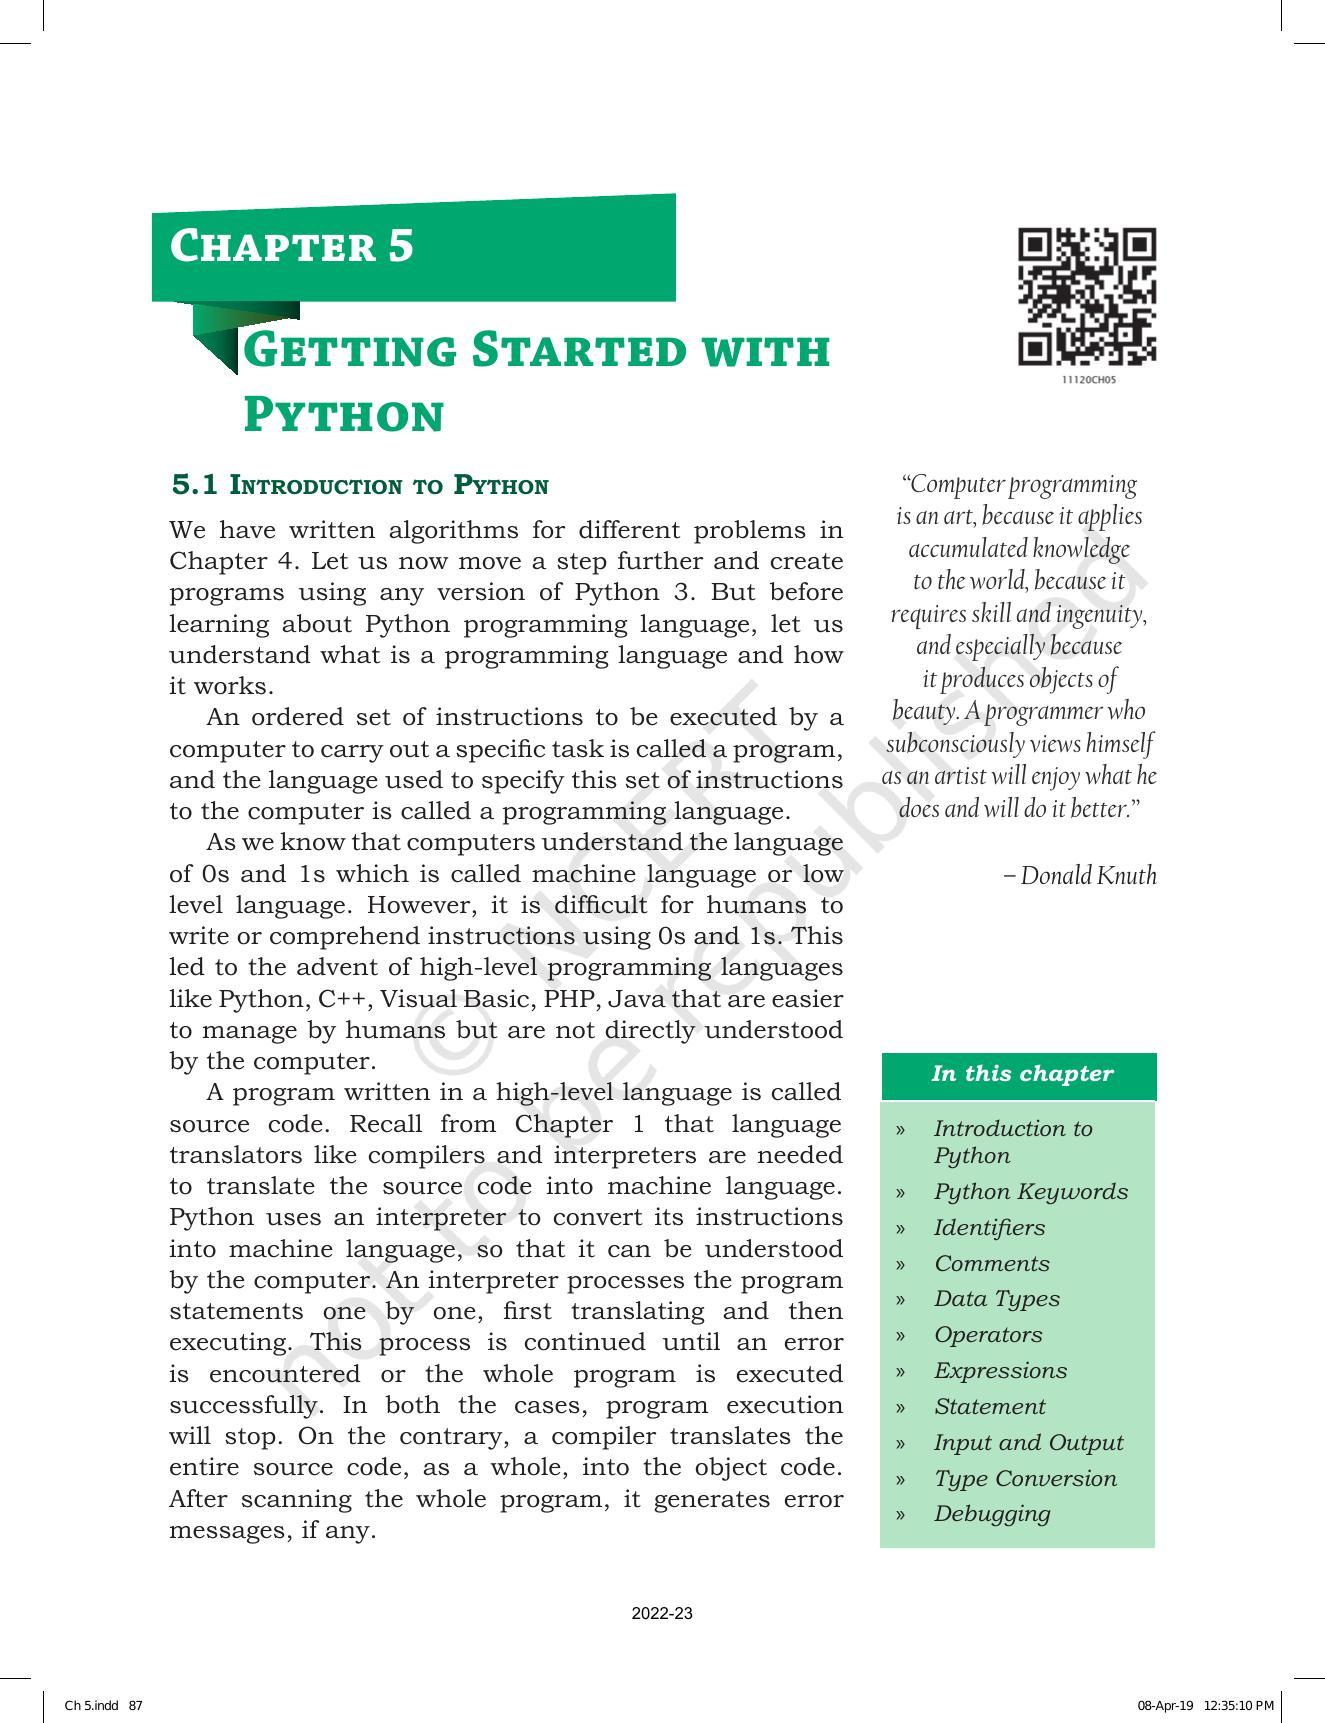 NCERT Book for Class 11 Computer Science Chapter 5 Getting Started with Python - Page 1